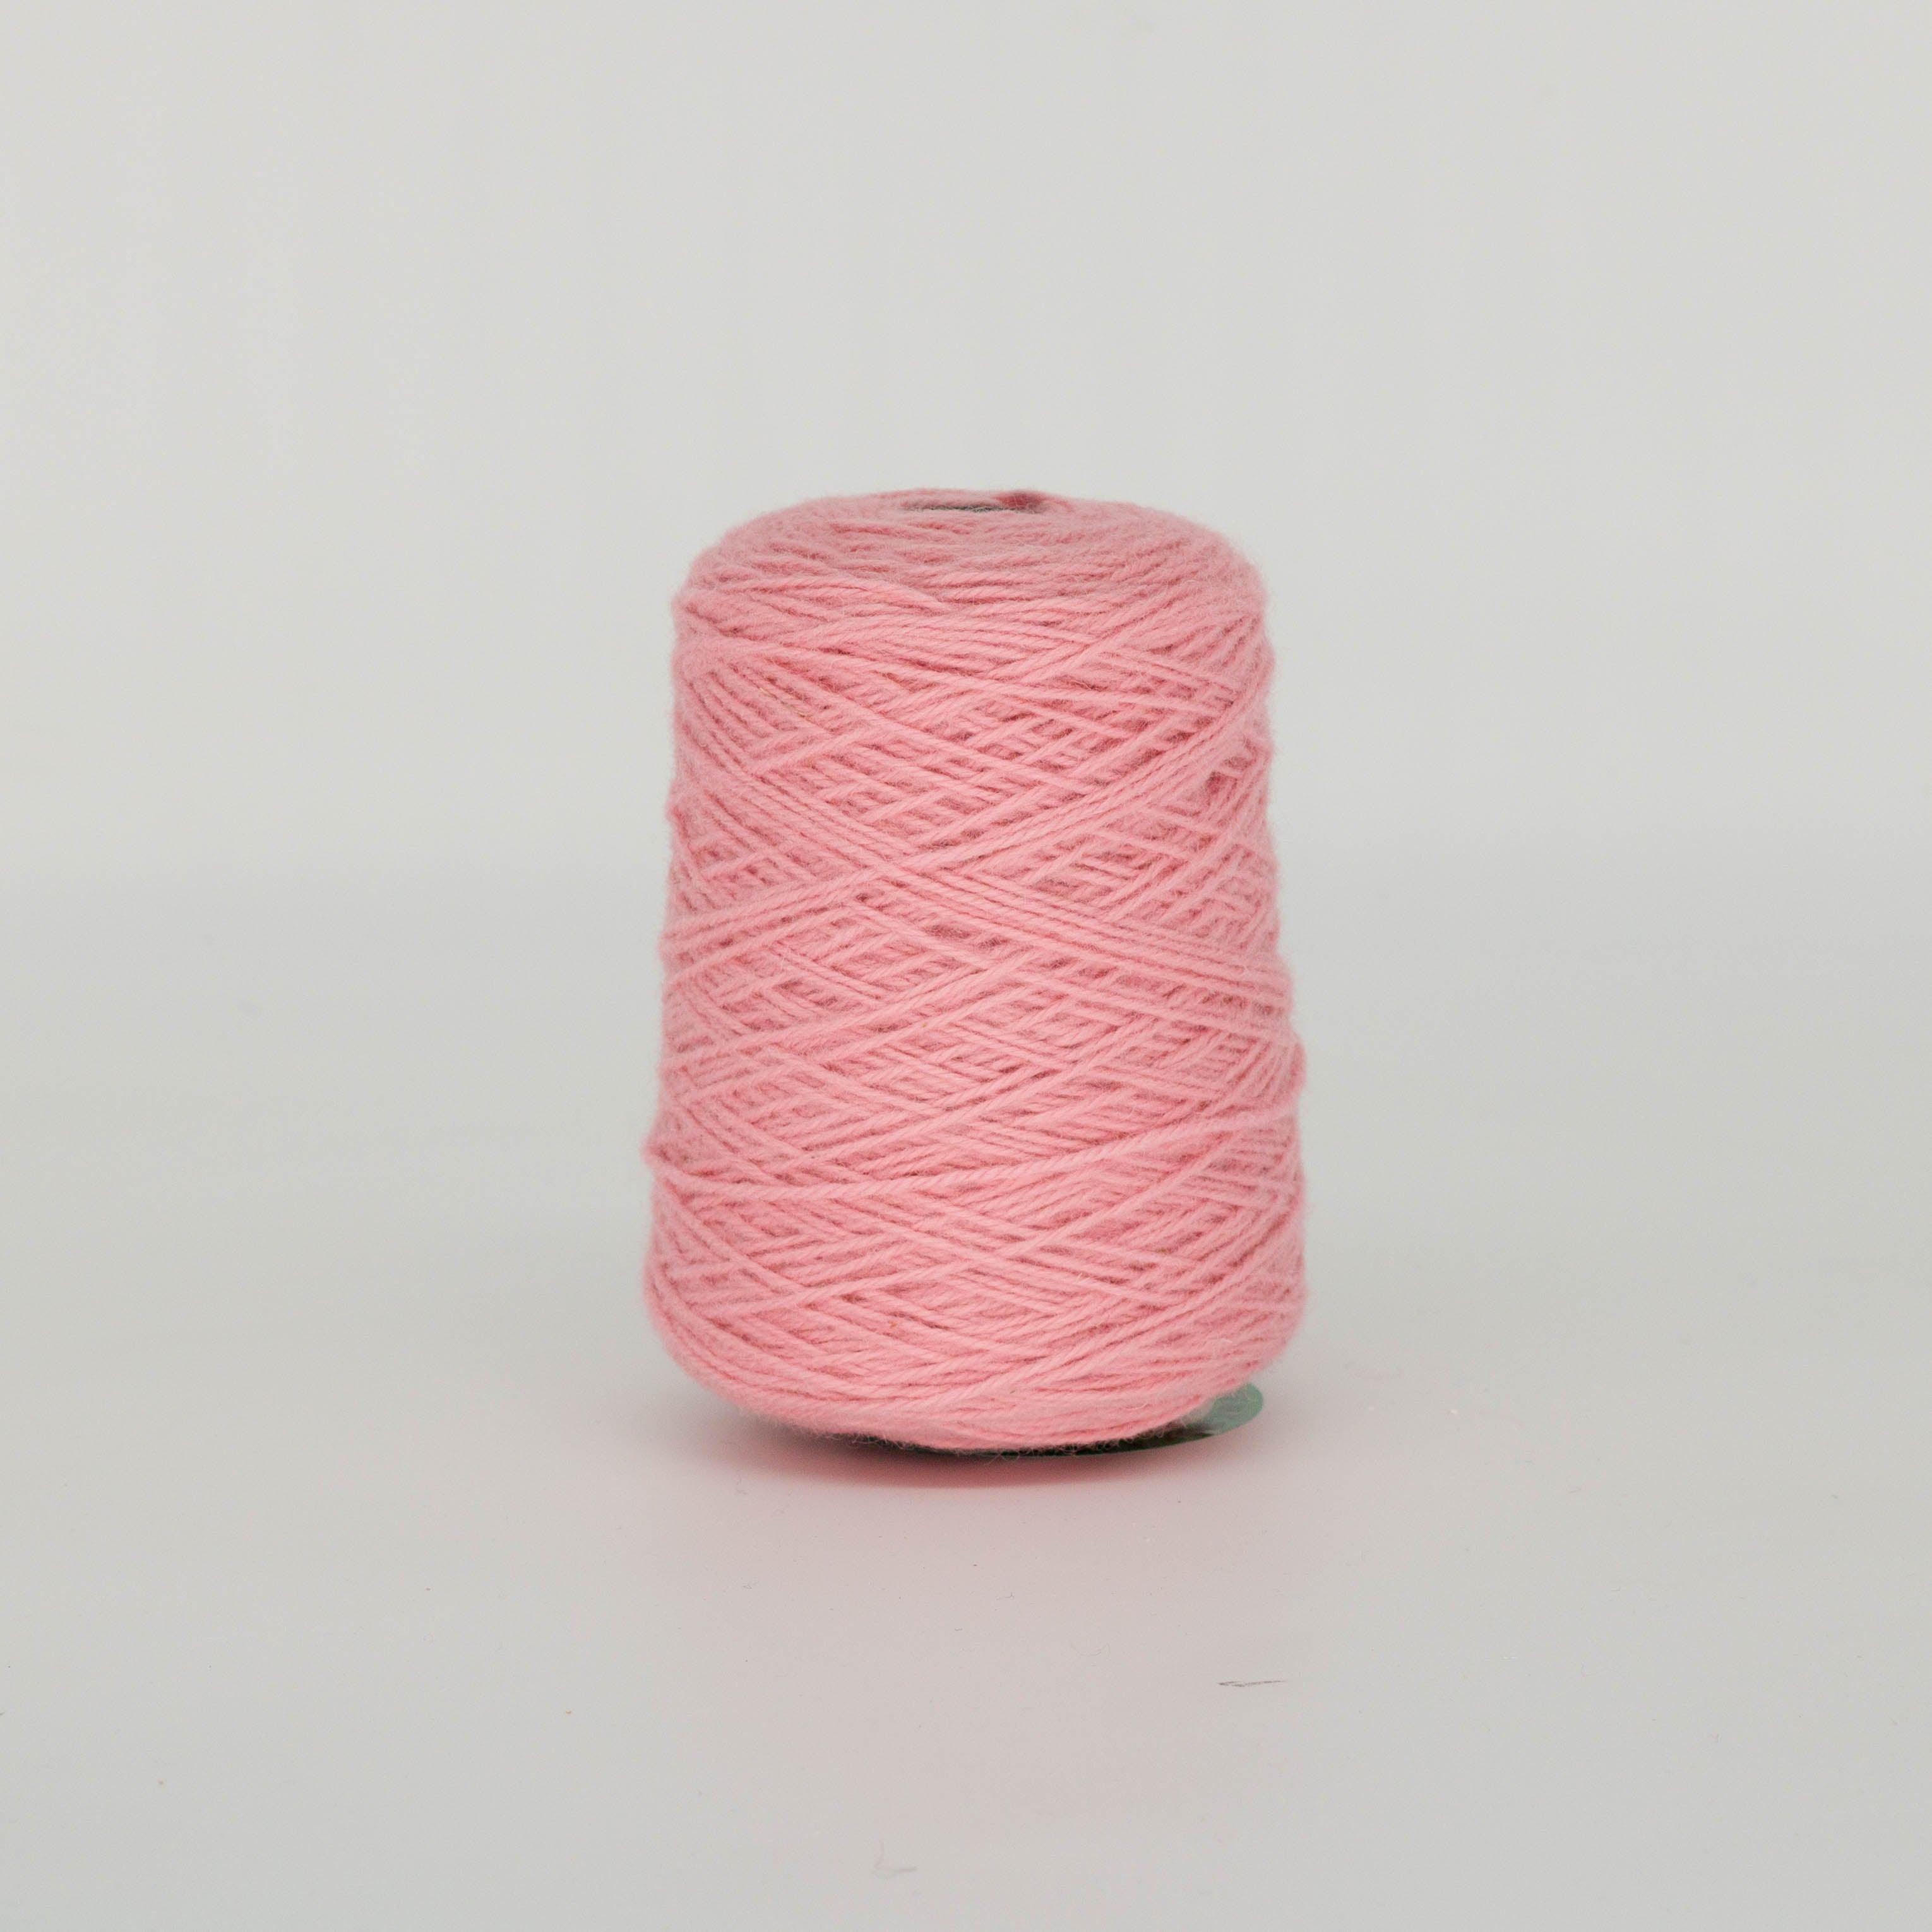 Shell rose 100% Laine Tufting Yarn On Cone (459)